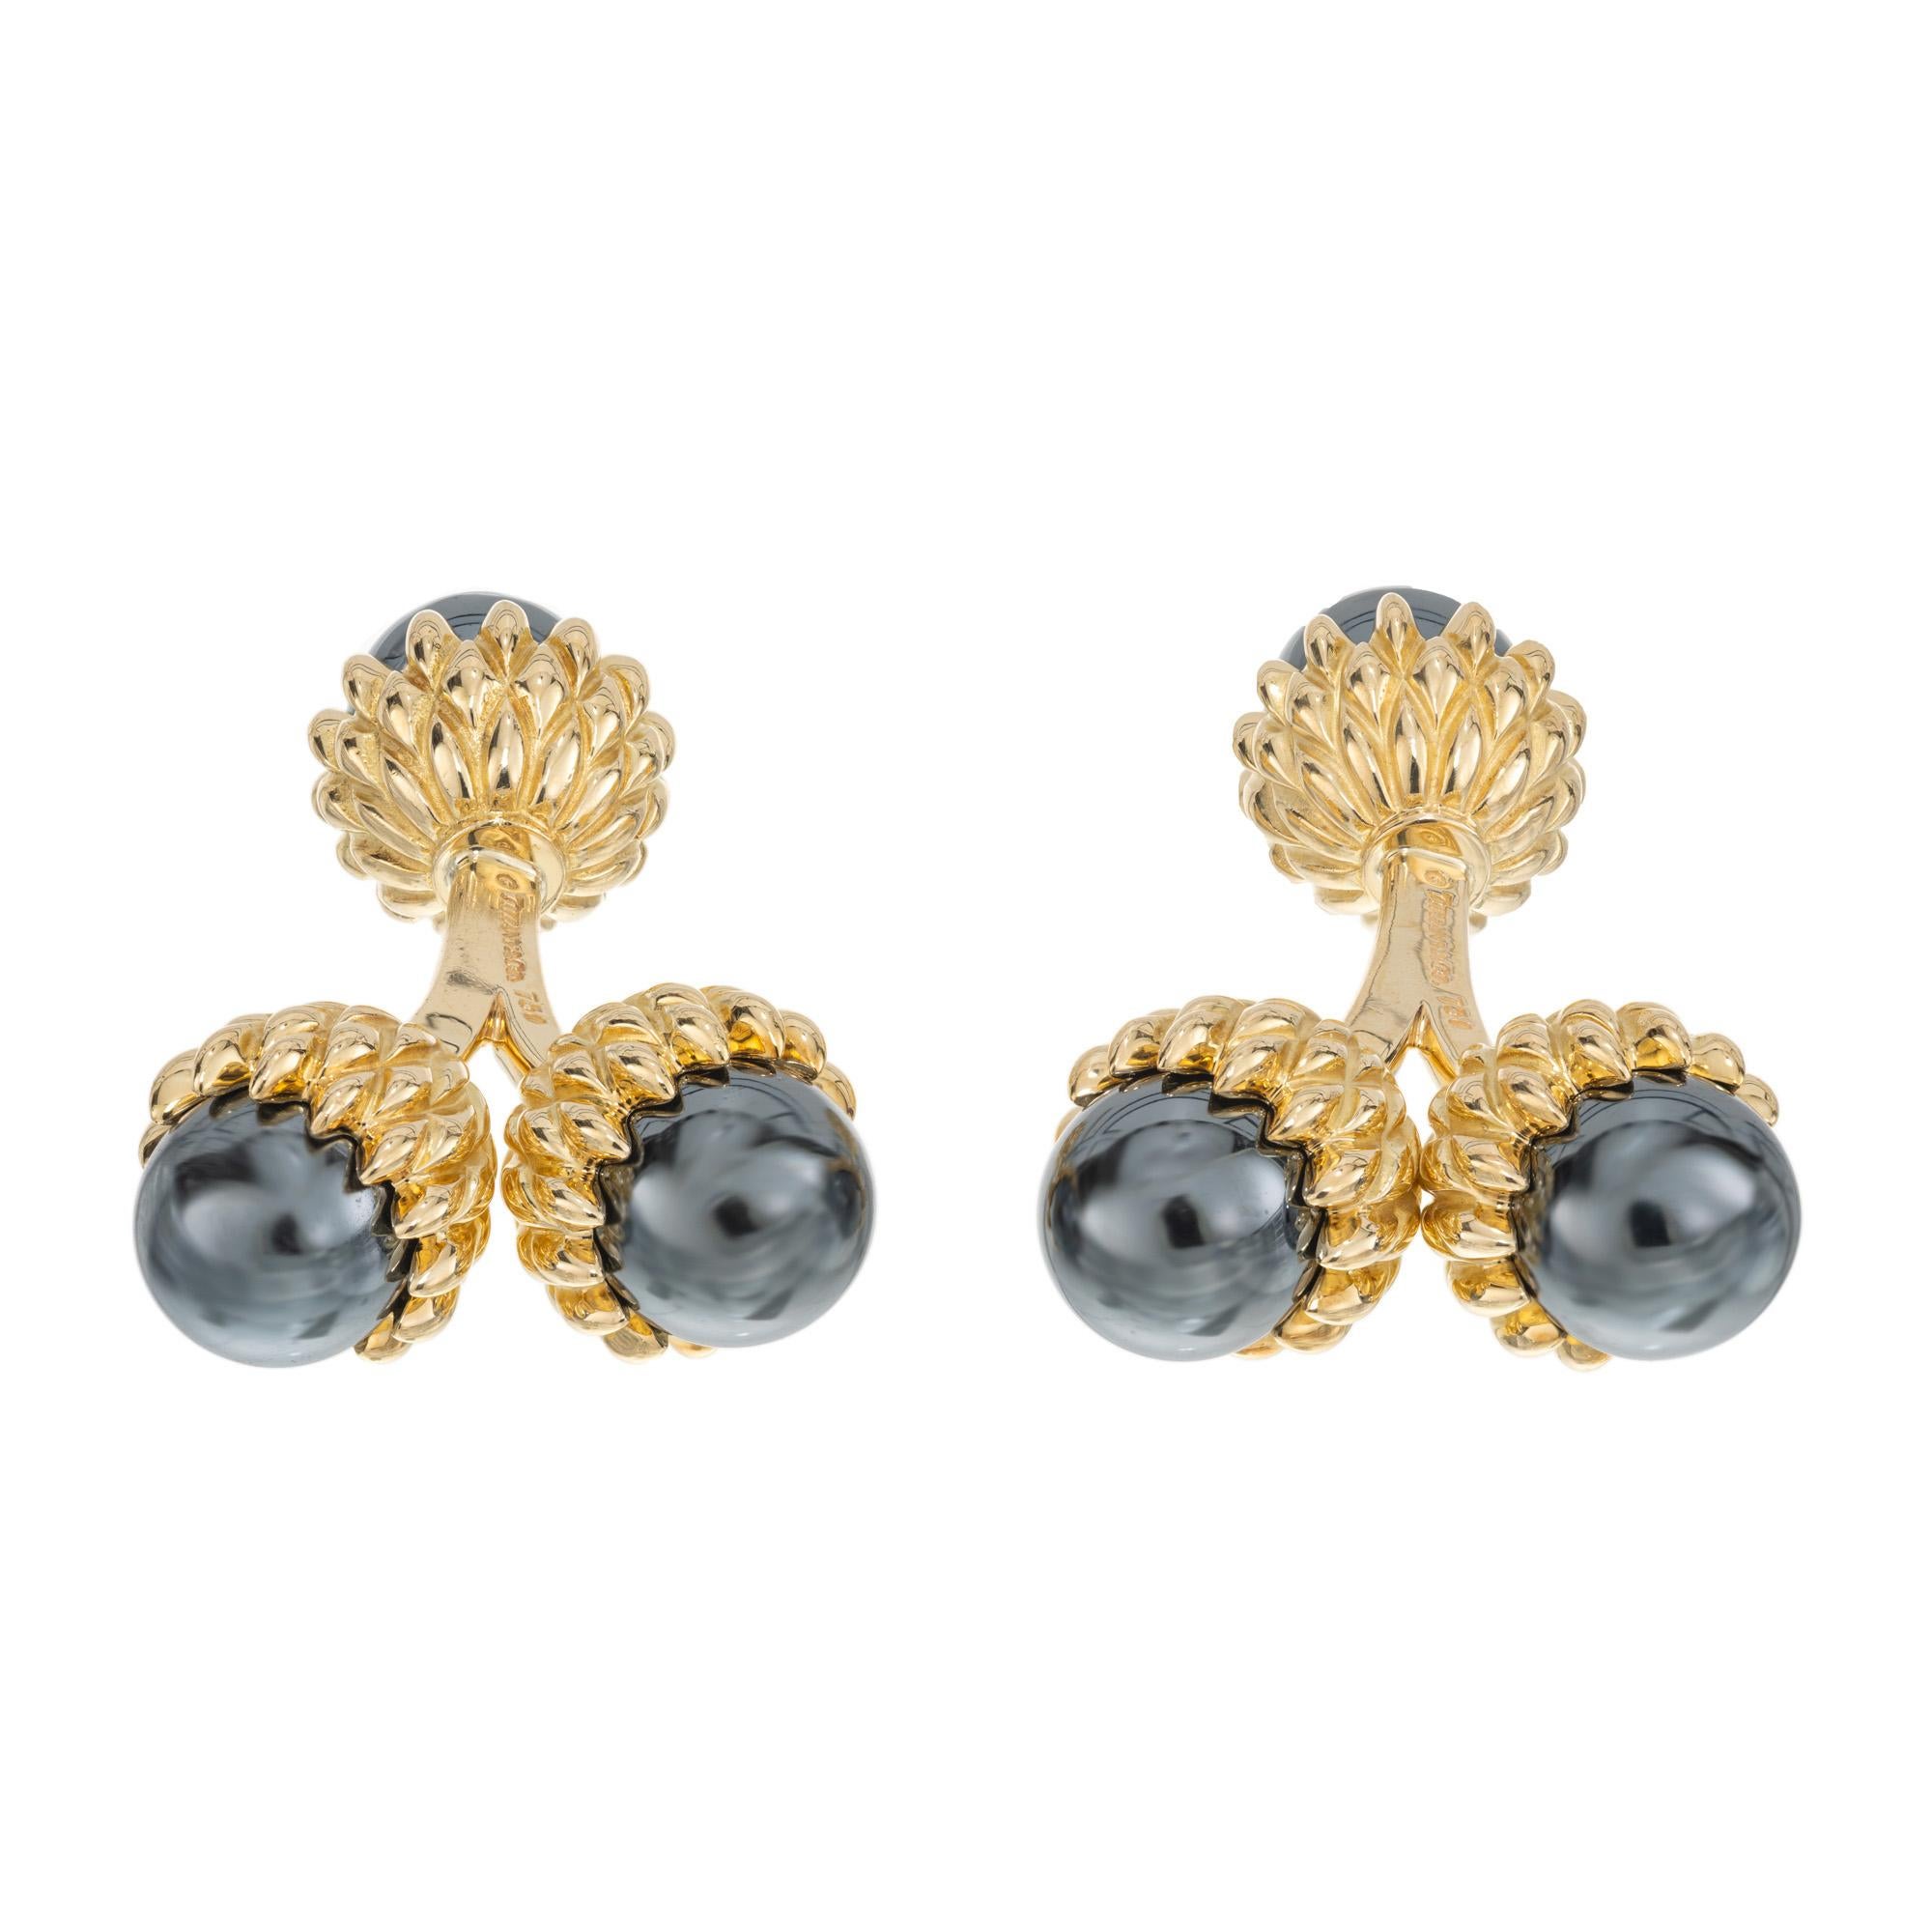 Tiffany & Co. Hematite acorn cufflinks. Classic Tiffany style, men's 18k yellow gold hematite double acorn cufflinks created by Jean Schlumberger. Beautiful blue grey cabochon hematite beads, set in highly detailed acorn style crowns. 

6 gray